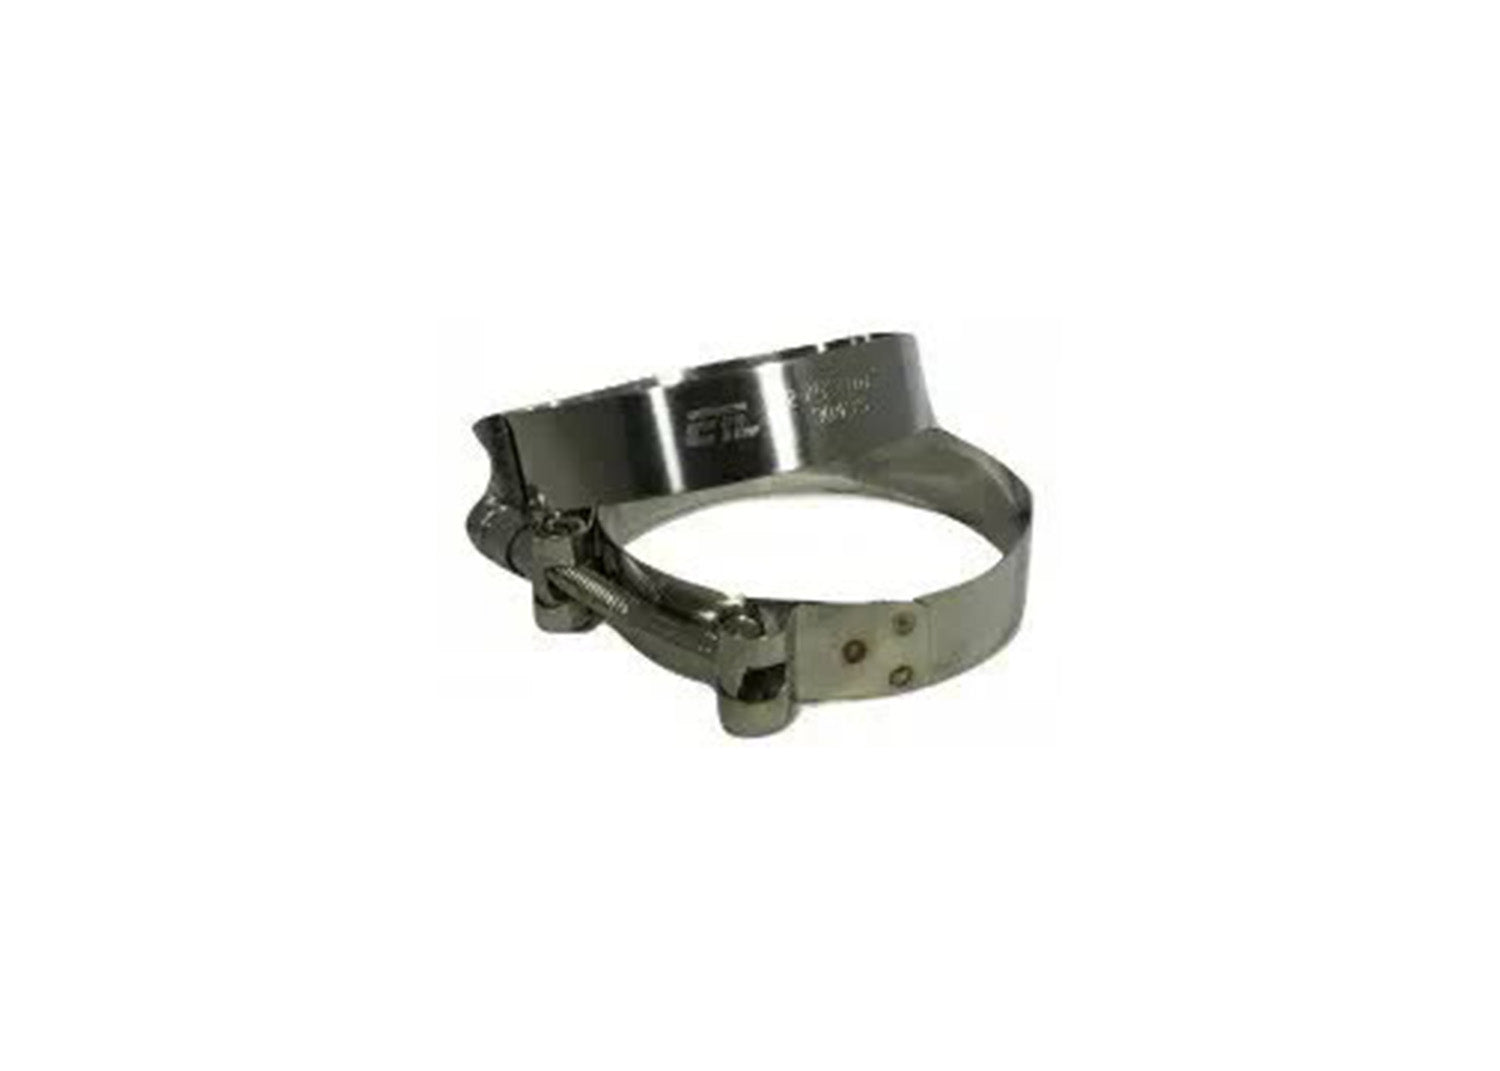 T-Bolt Clamp for use with 4.50" or 4.75" Inside Diameter Hose Coupling Part Number- 221013